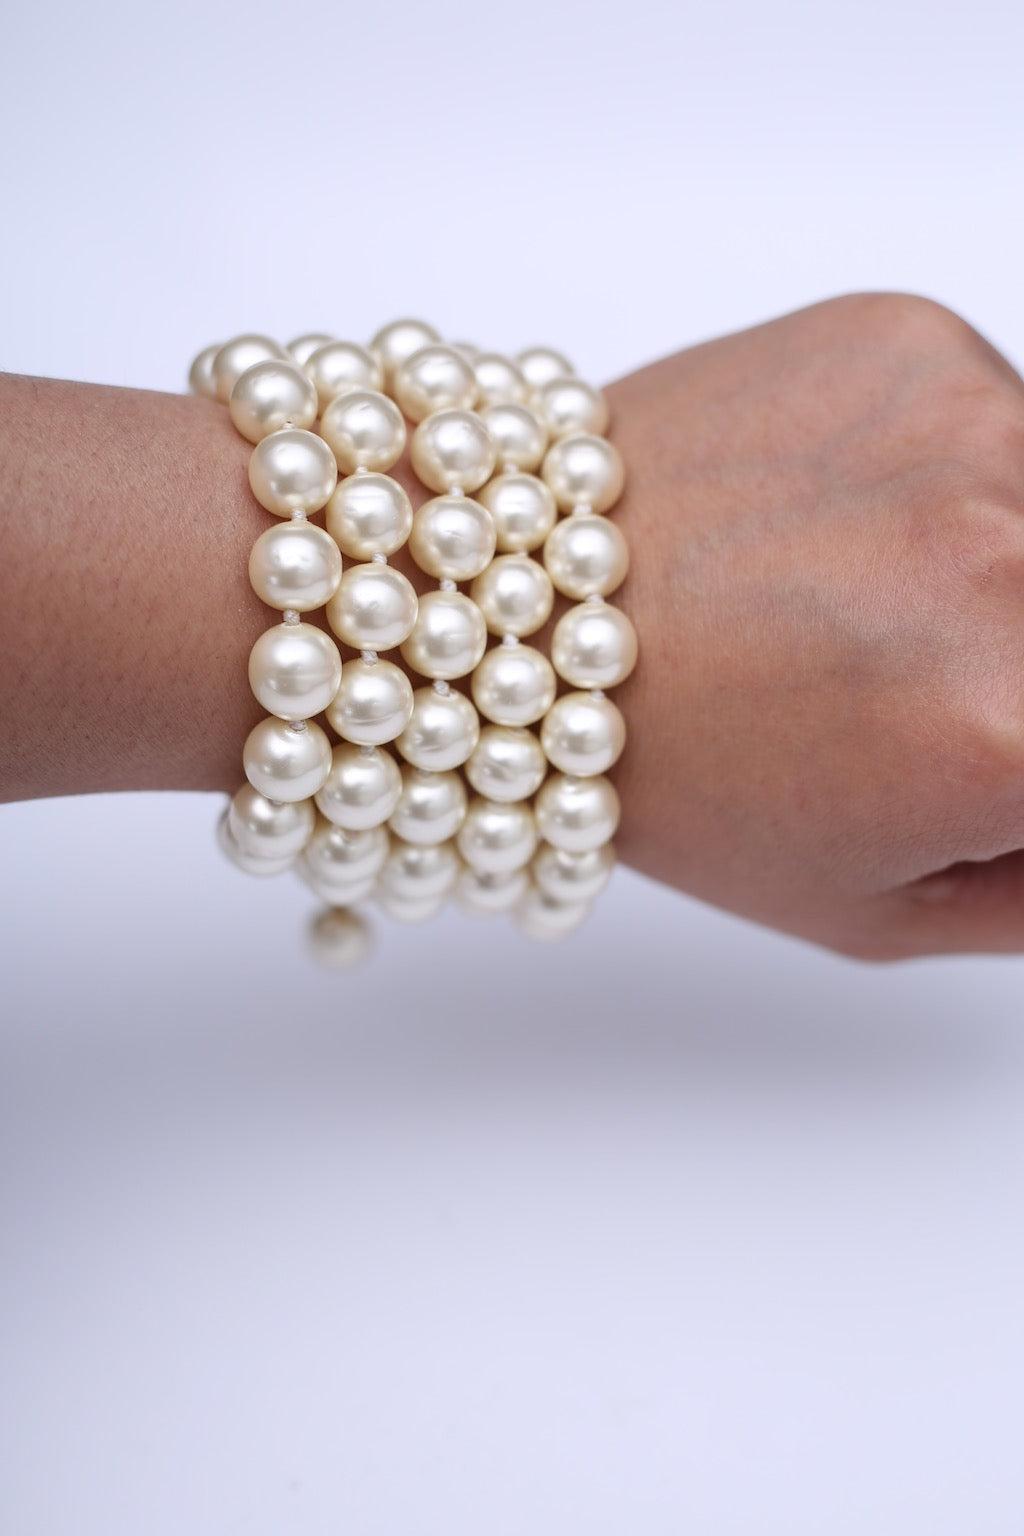 Chanel - (Made in France) Bracelet comprised of five strands of knot-mounted pearly beads. It closes with a golden metal clasp with a small chain. Signed on a plate. 2cc3 Collection.

Additional information:
Condition: Very good